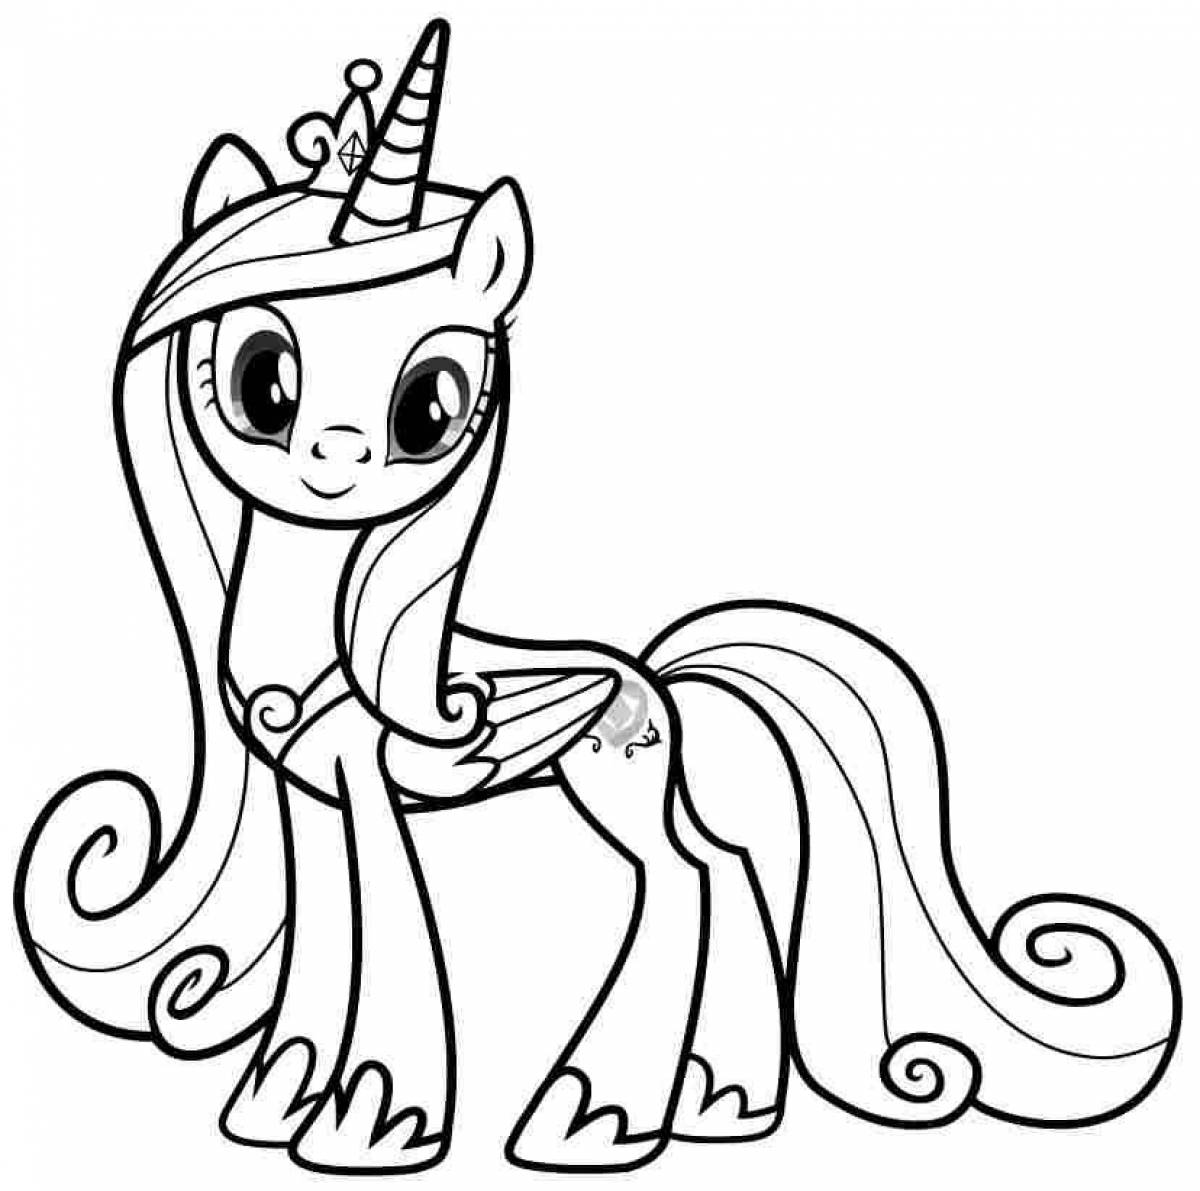 Magic pony coloring page